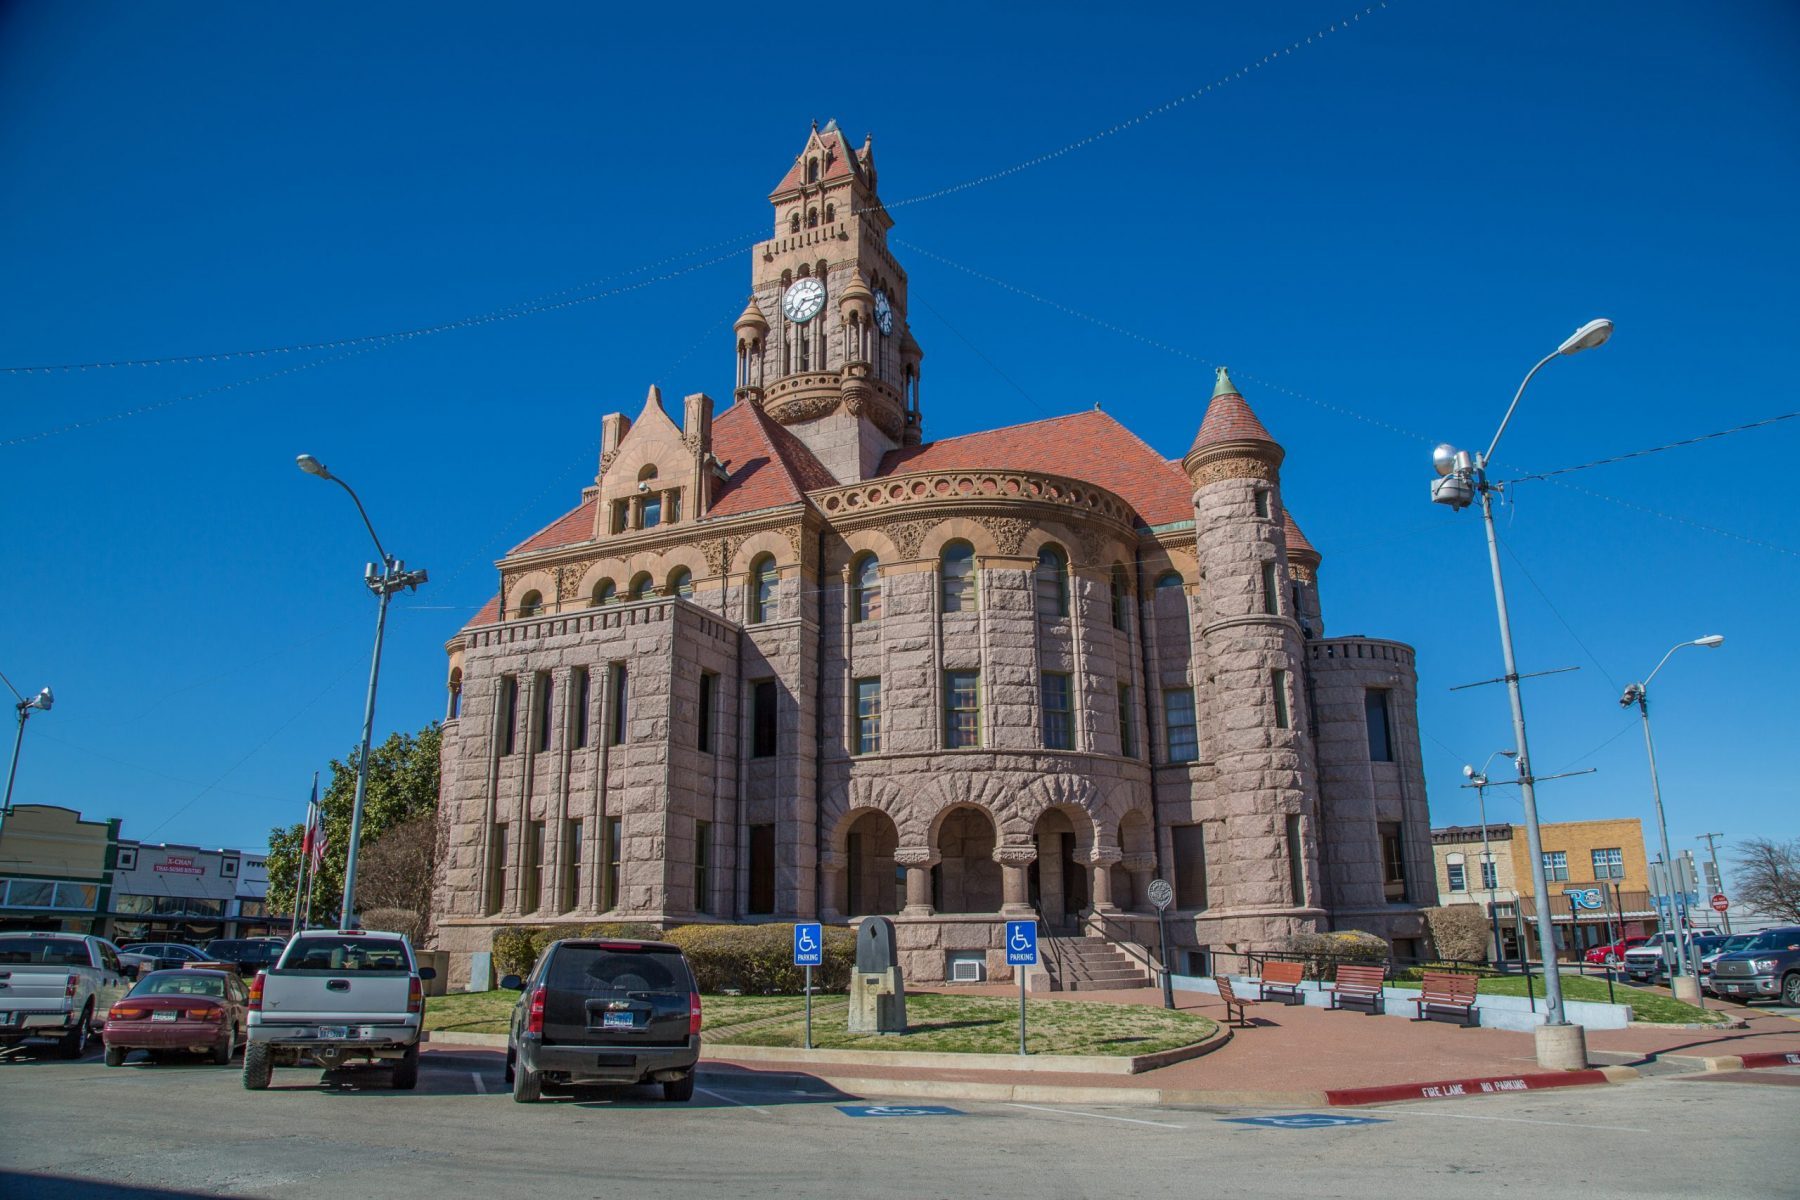 The Wise County Courthouse in Decatur sits under a blue sky. Photo by Will van Overbeek.